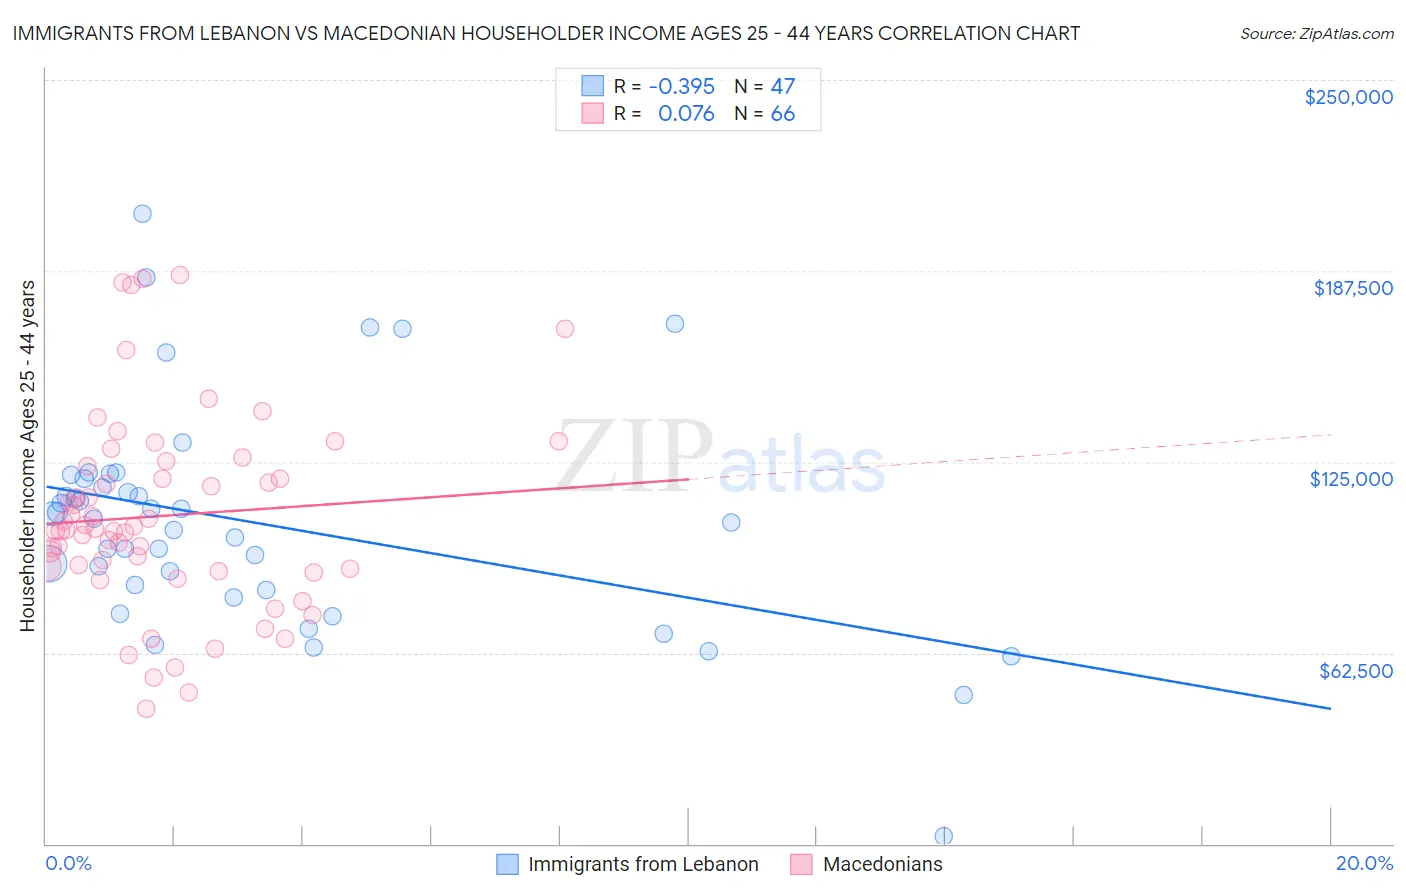 Immigrants from Lebanon vs Macedonian Householder Income Ages 25 - 44 years